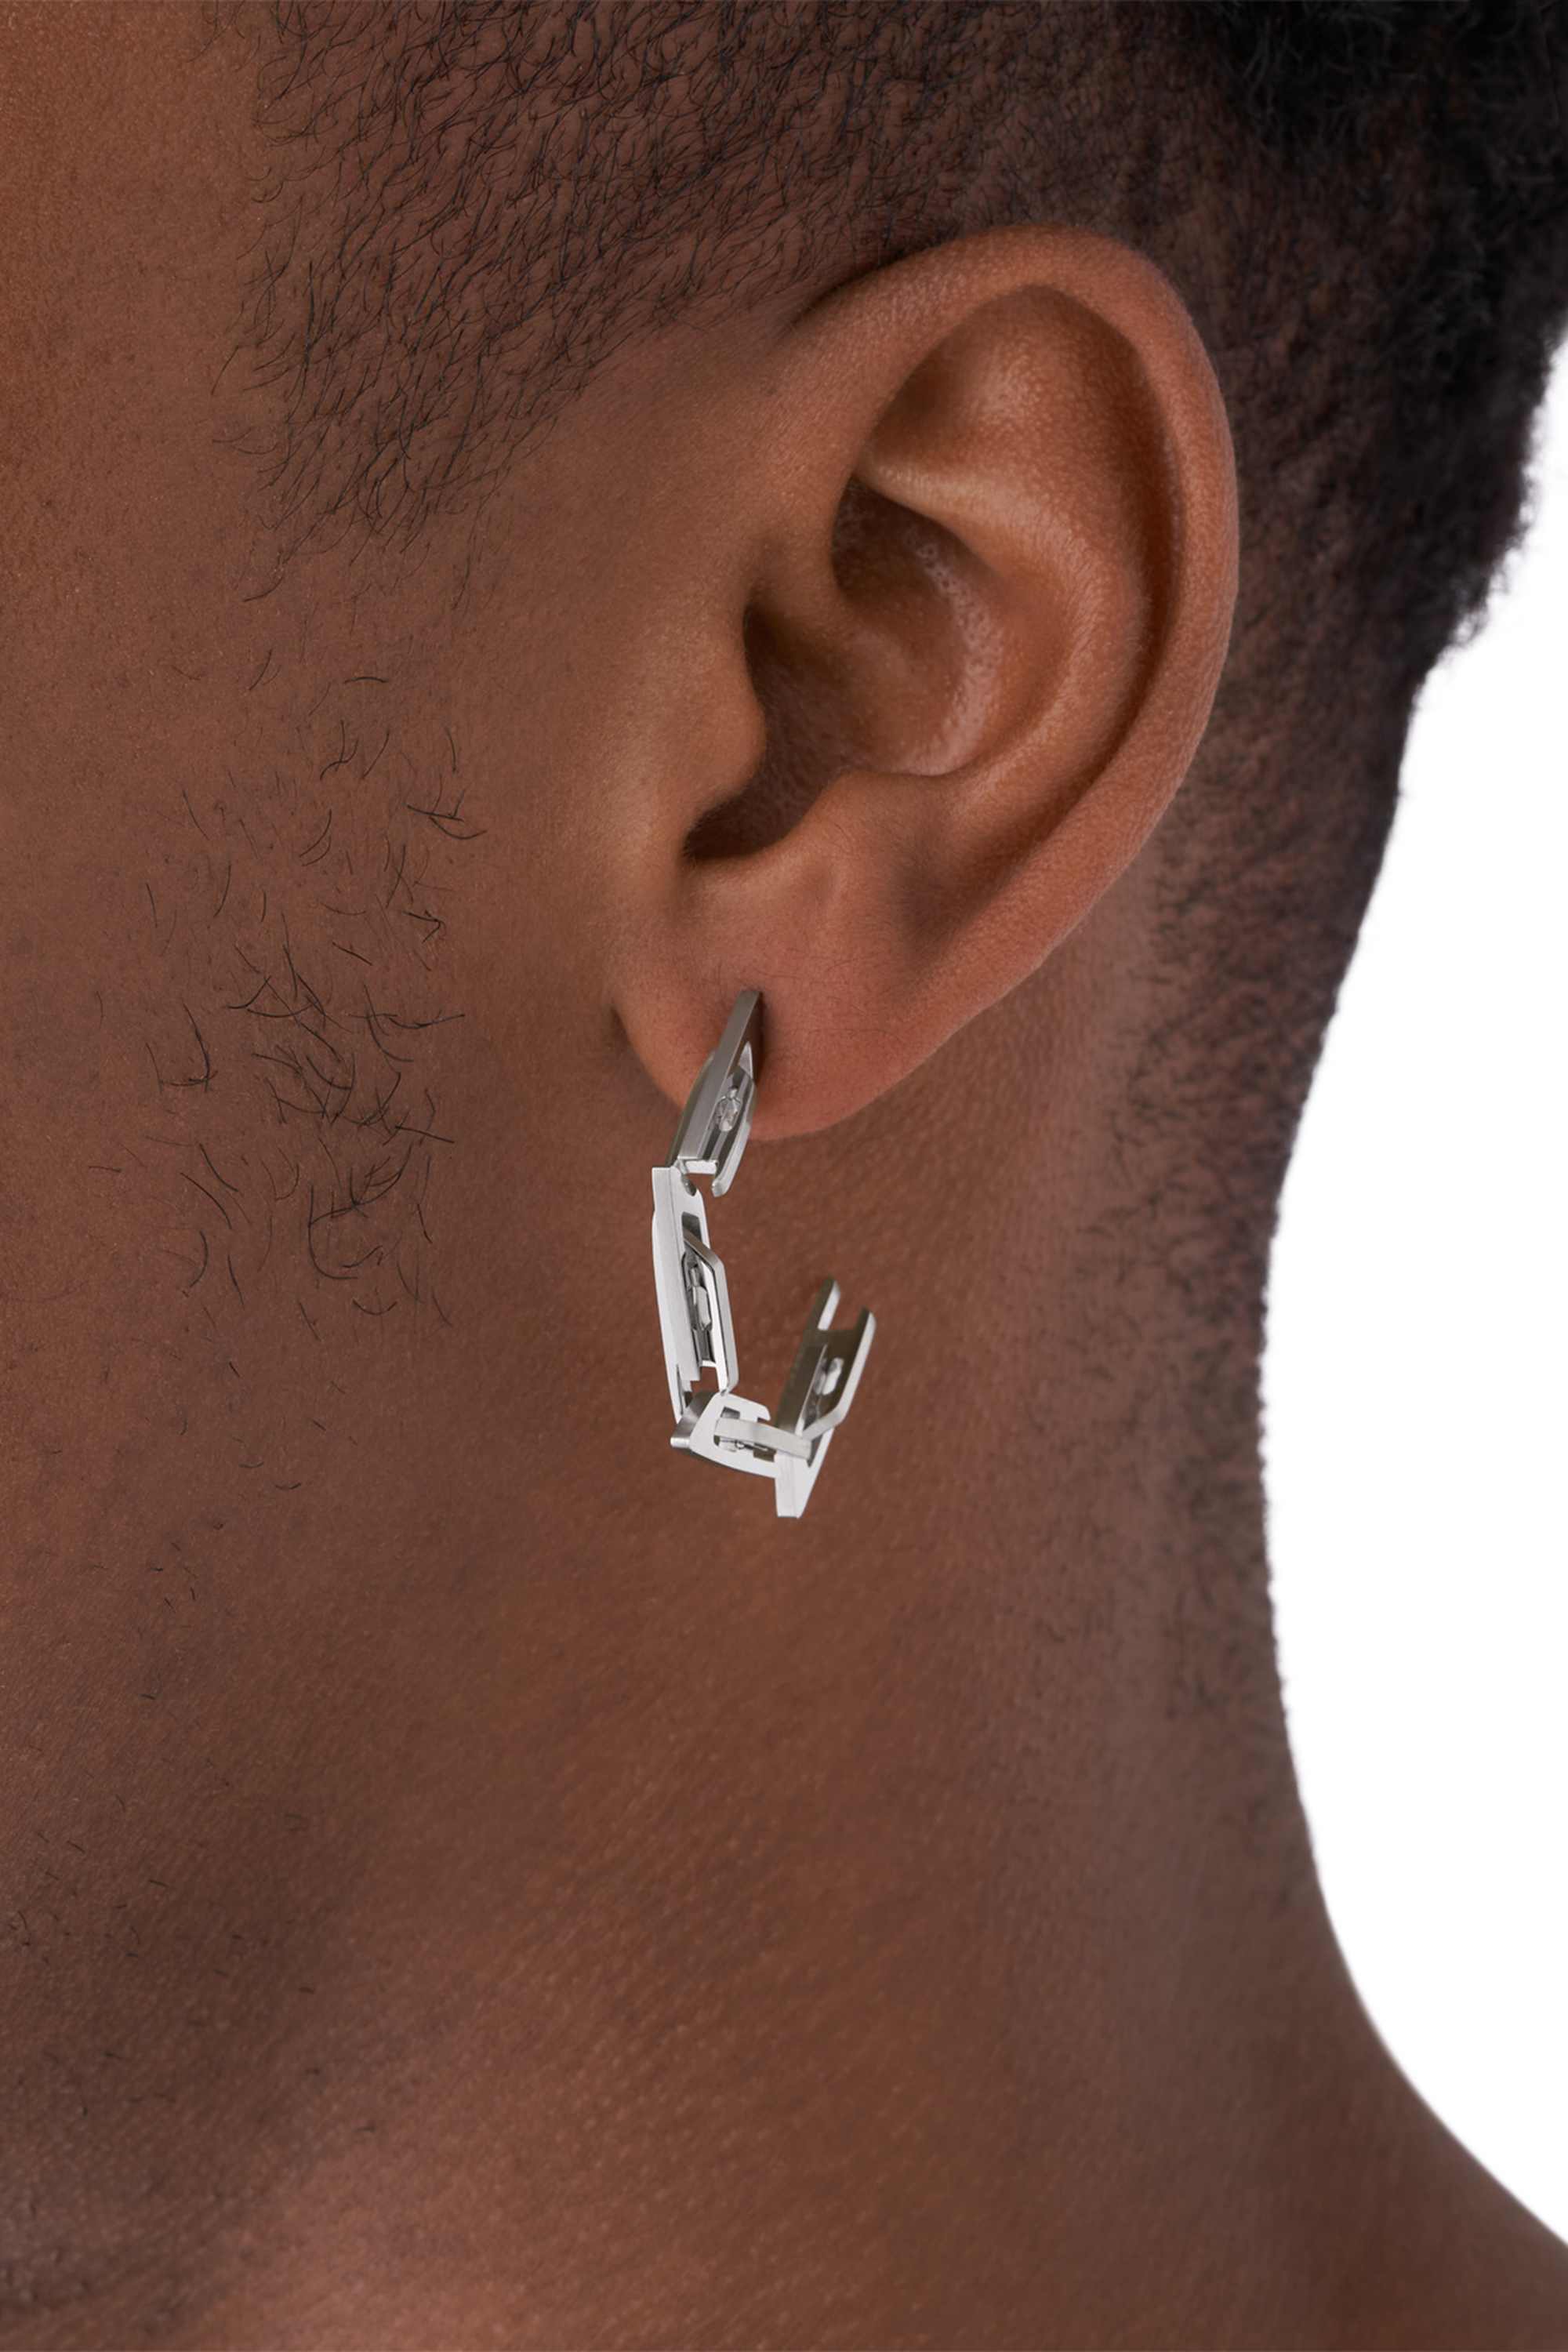 Diesel Only The Brave stud earring Men Accessories Jewelry Wholesale